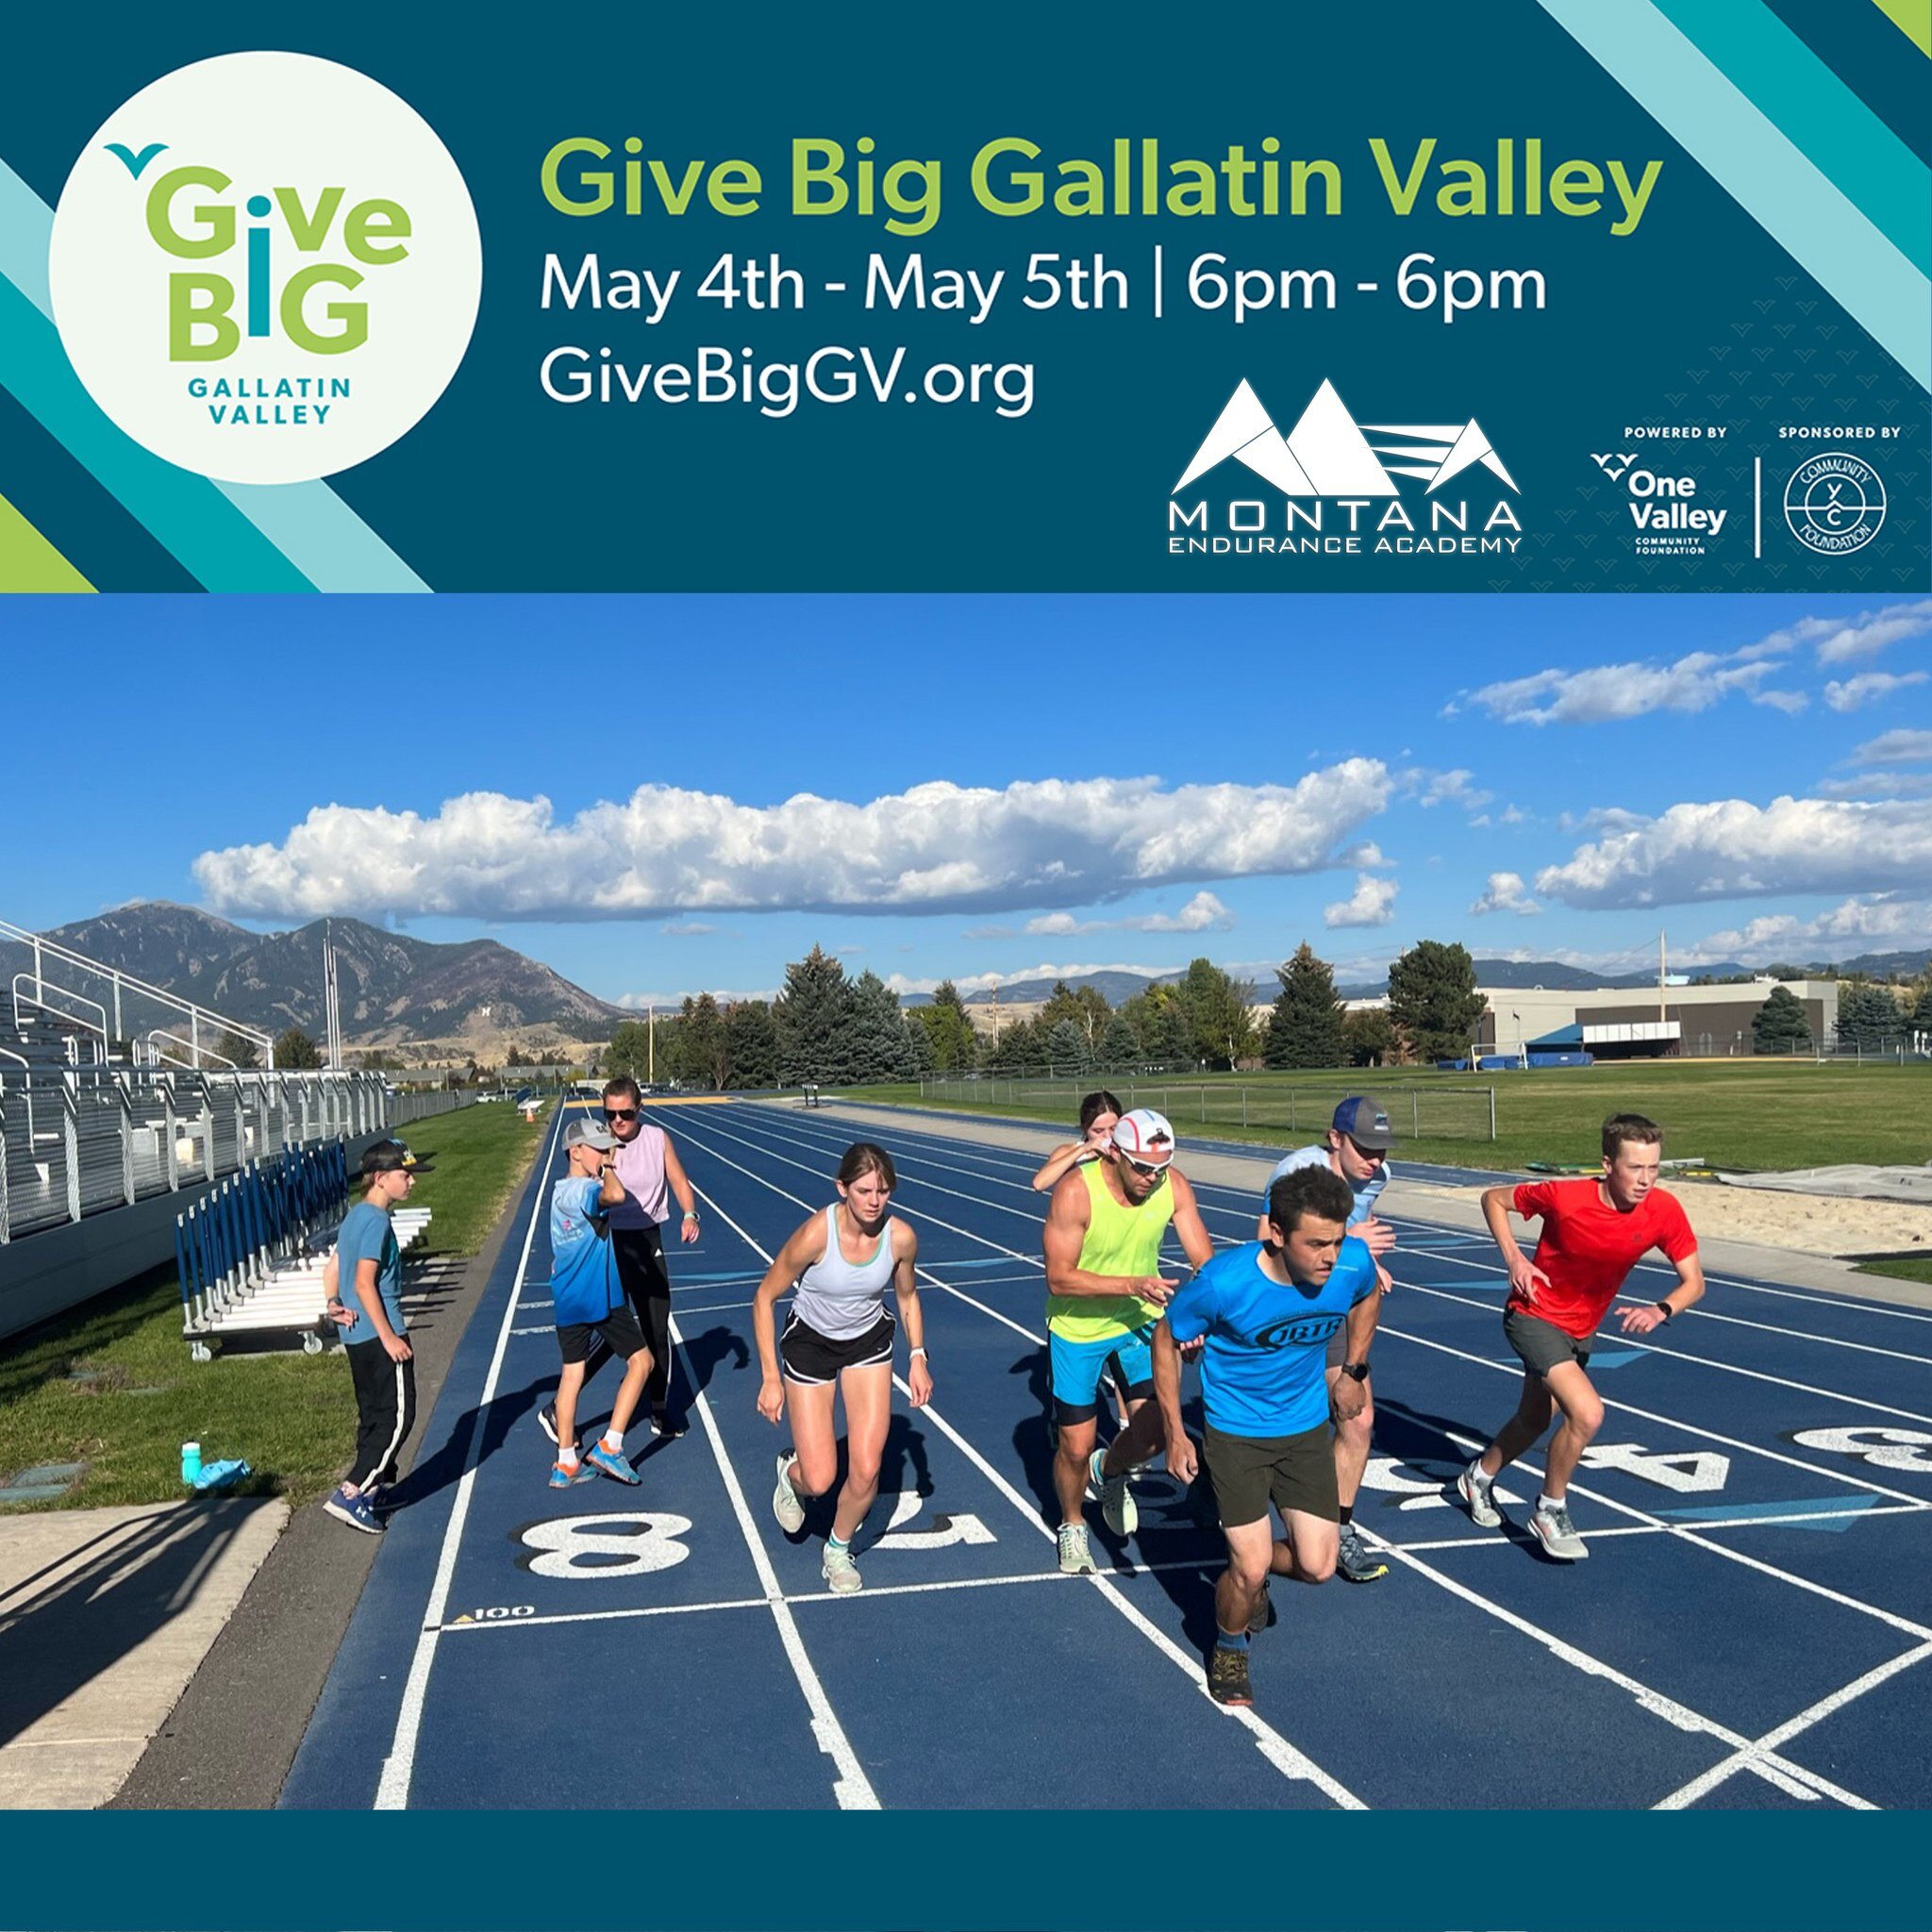 This is your chance to be a part of our community's day of giving - an opportunity to unite our community around causes in which we truly believe and help nonprofit organizations connect to the larger community.

Starting today at 6 pm on May 4th, vi